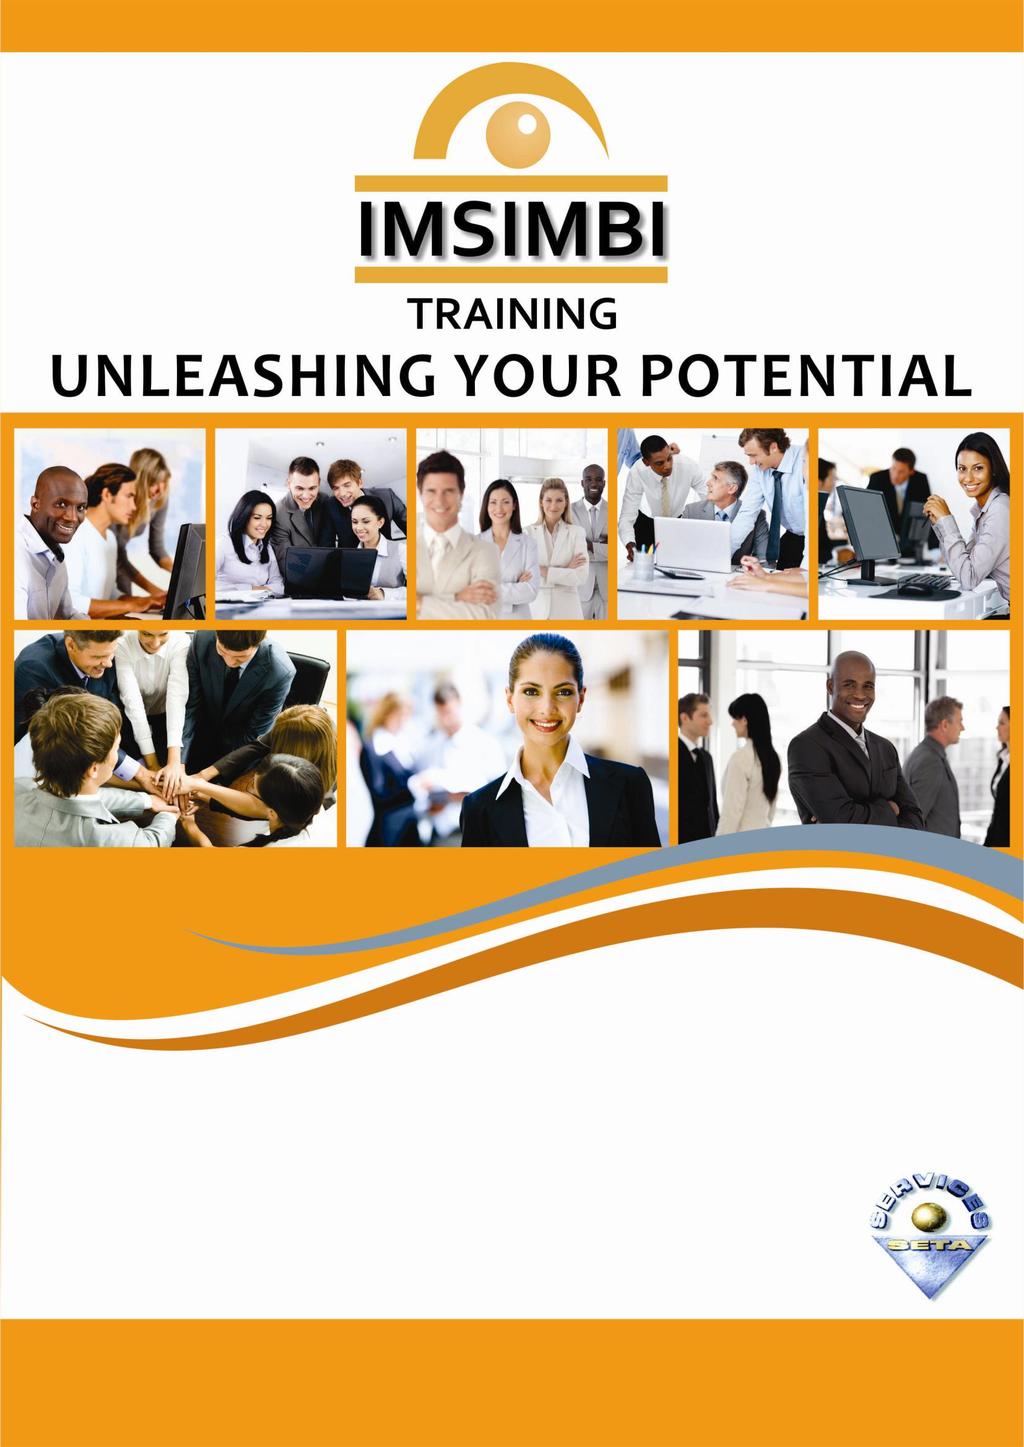 Imsimbi Training proudly presents Diversity Management 2 DAYS Imsimbi Training is a fully accredited training provider with the Services Seta, number 2147, as well as a Level 2 Contributor BBBEE